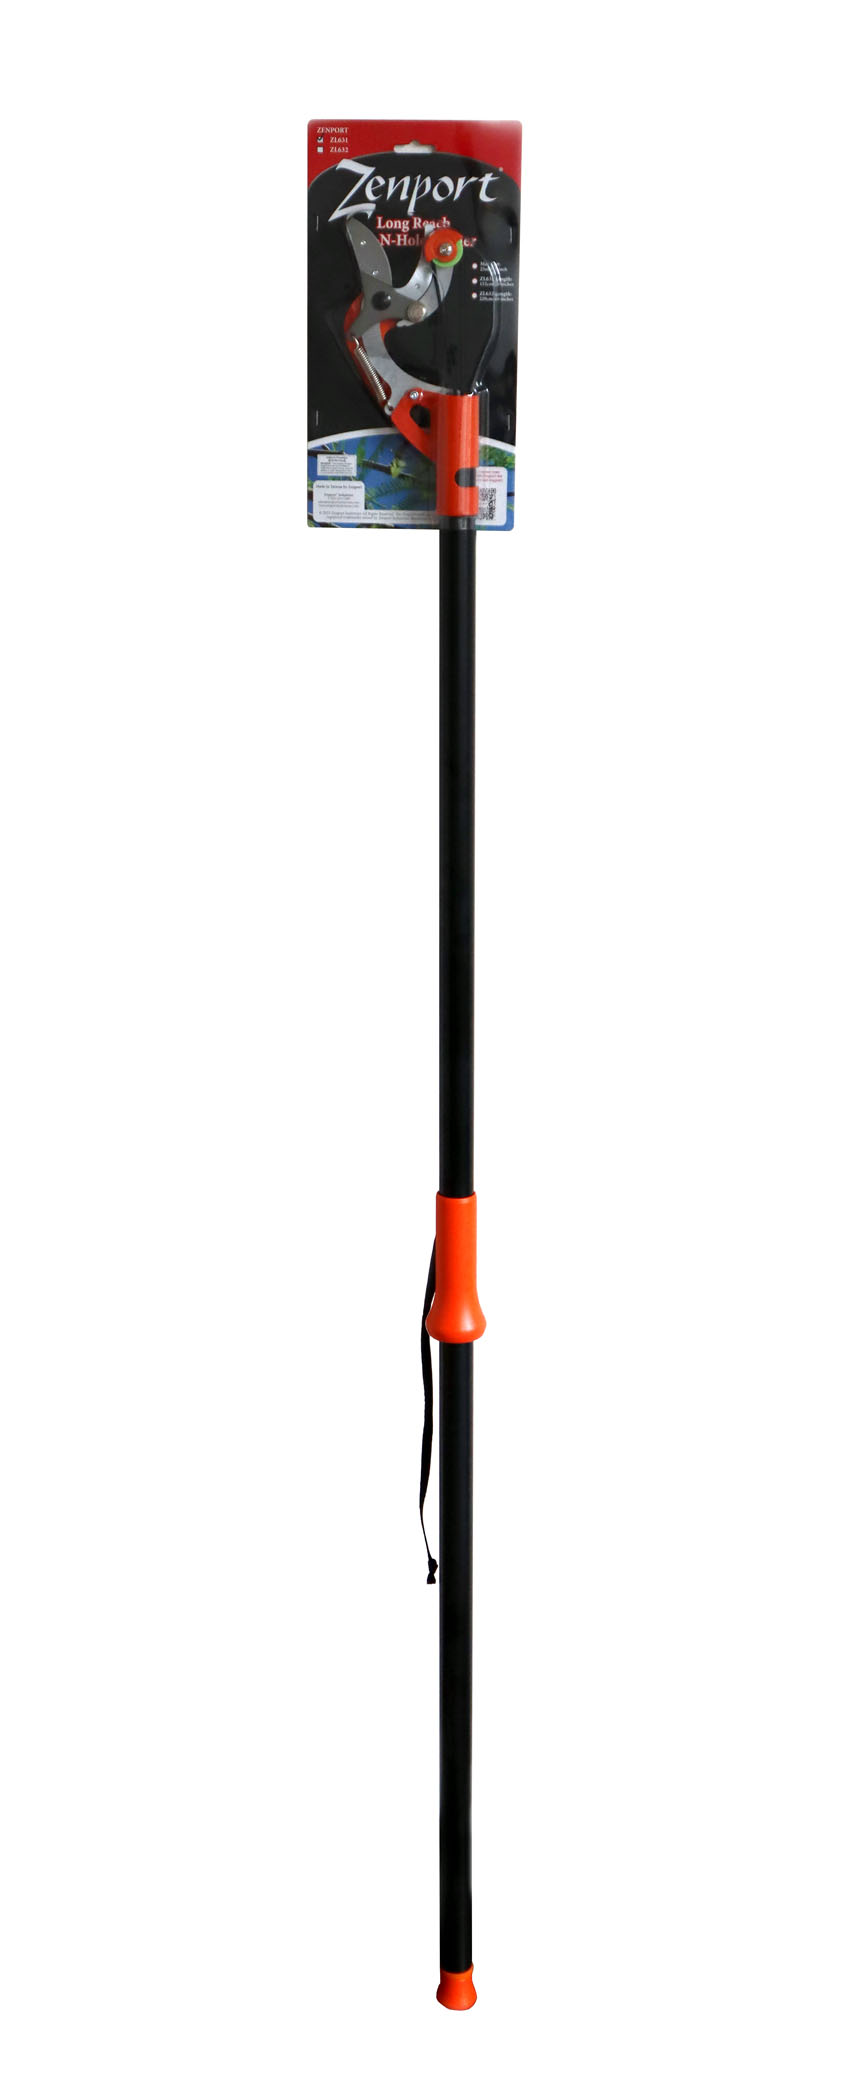 Zenport Pole Pruner ZL631 60-Inch Long Reach, Pump-Action, Draw-Cord, Cut-N-Hold, For Pruning Fruit Trees